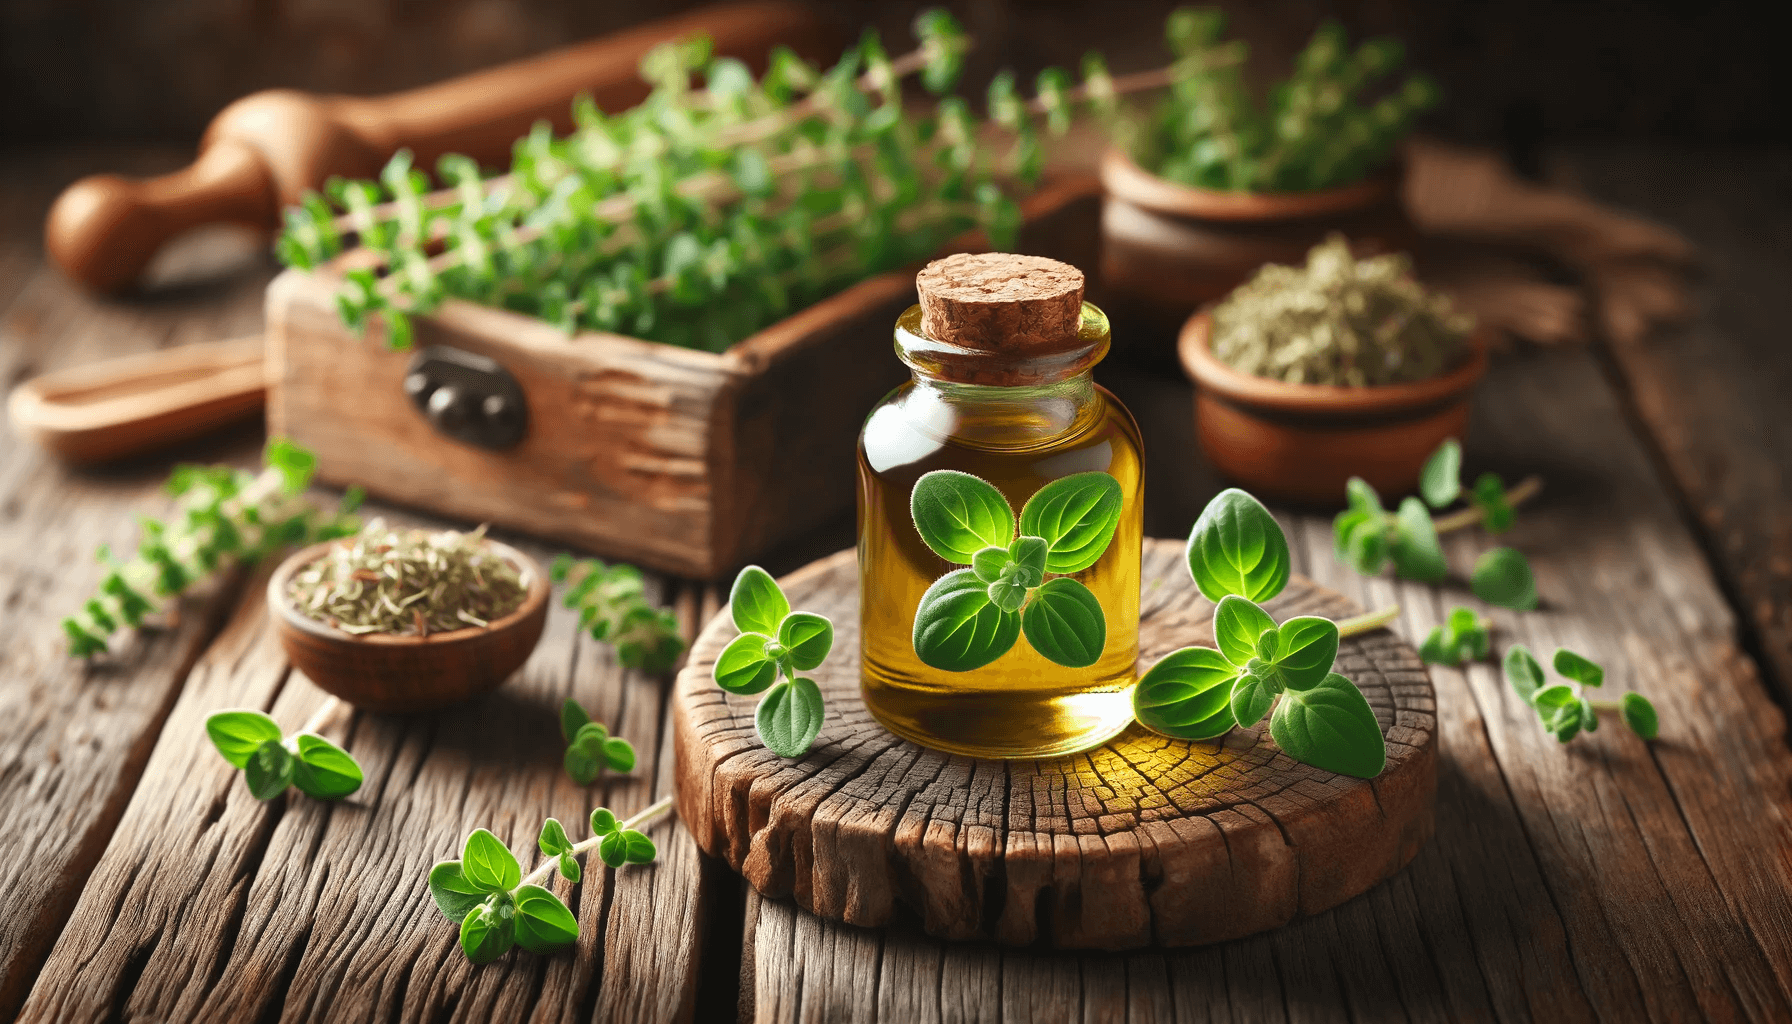 Oregano oil bottle surrounded by fresh oregano leaves and wooden accents, emphasizing natural ingredients and a holistic approach to wellness.